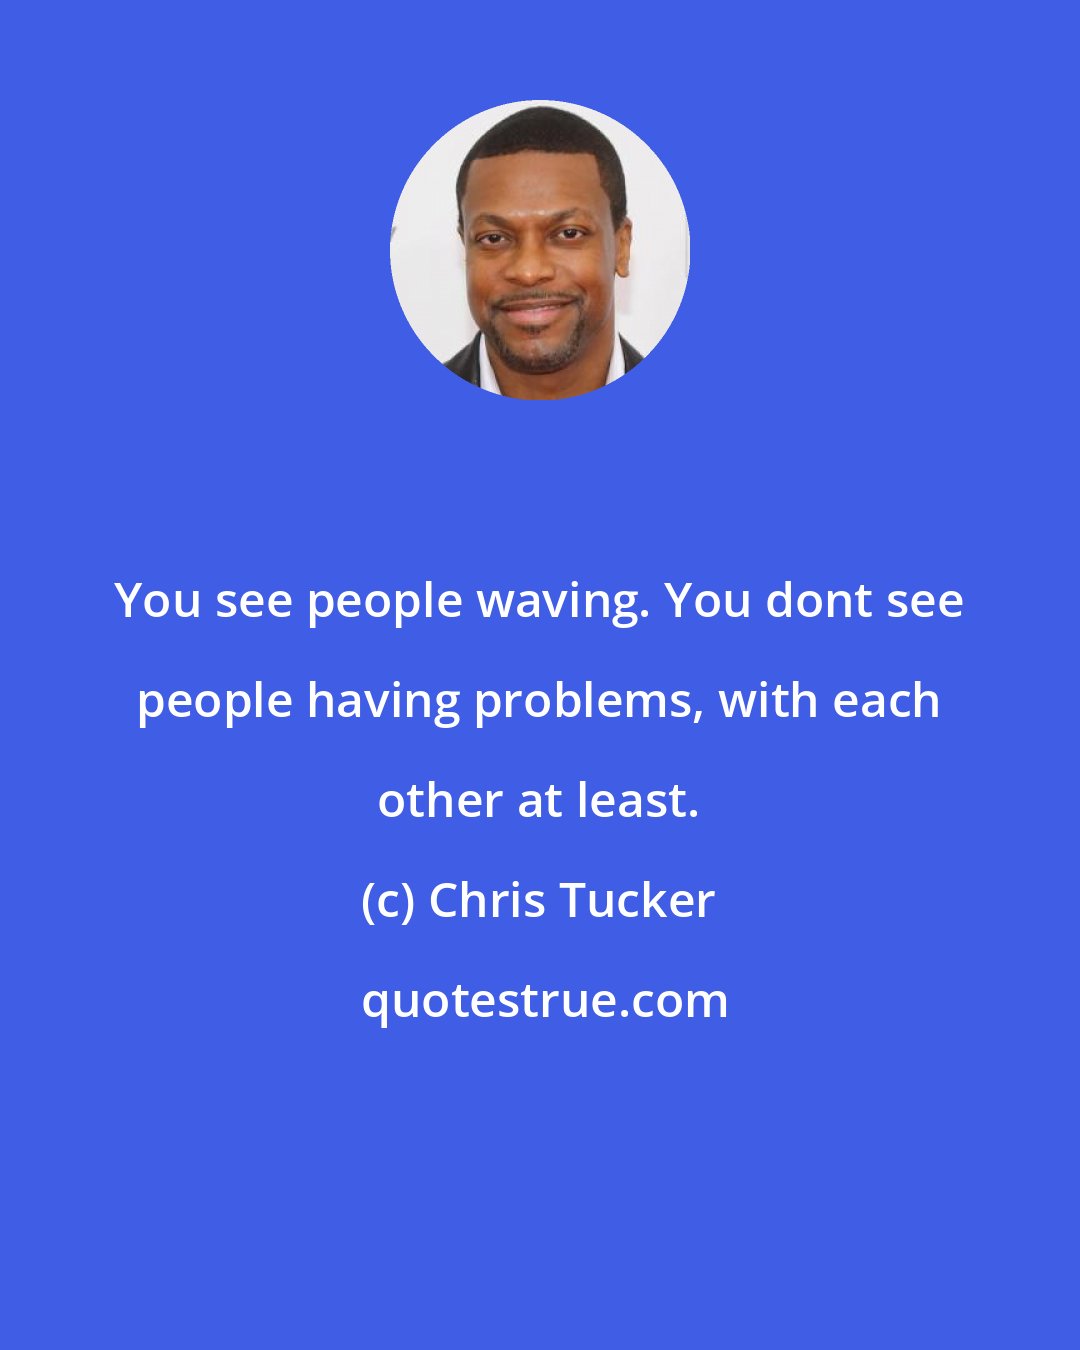 Chris Tucker: You see people waving. You dont see people having problems, with each other at least.